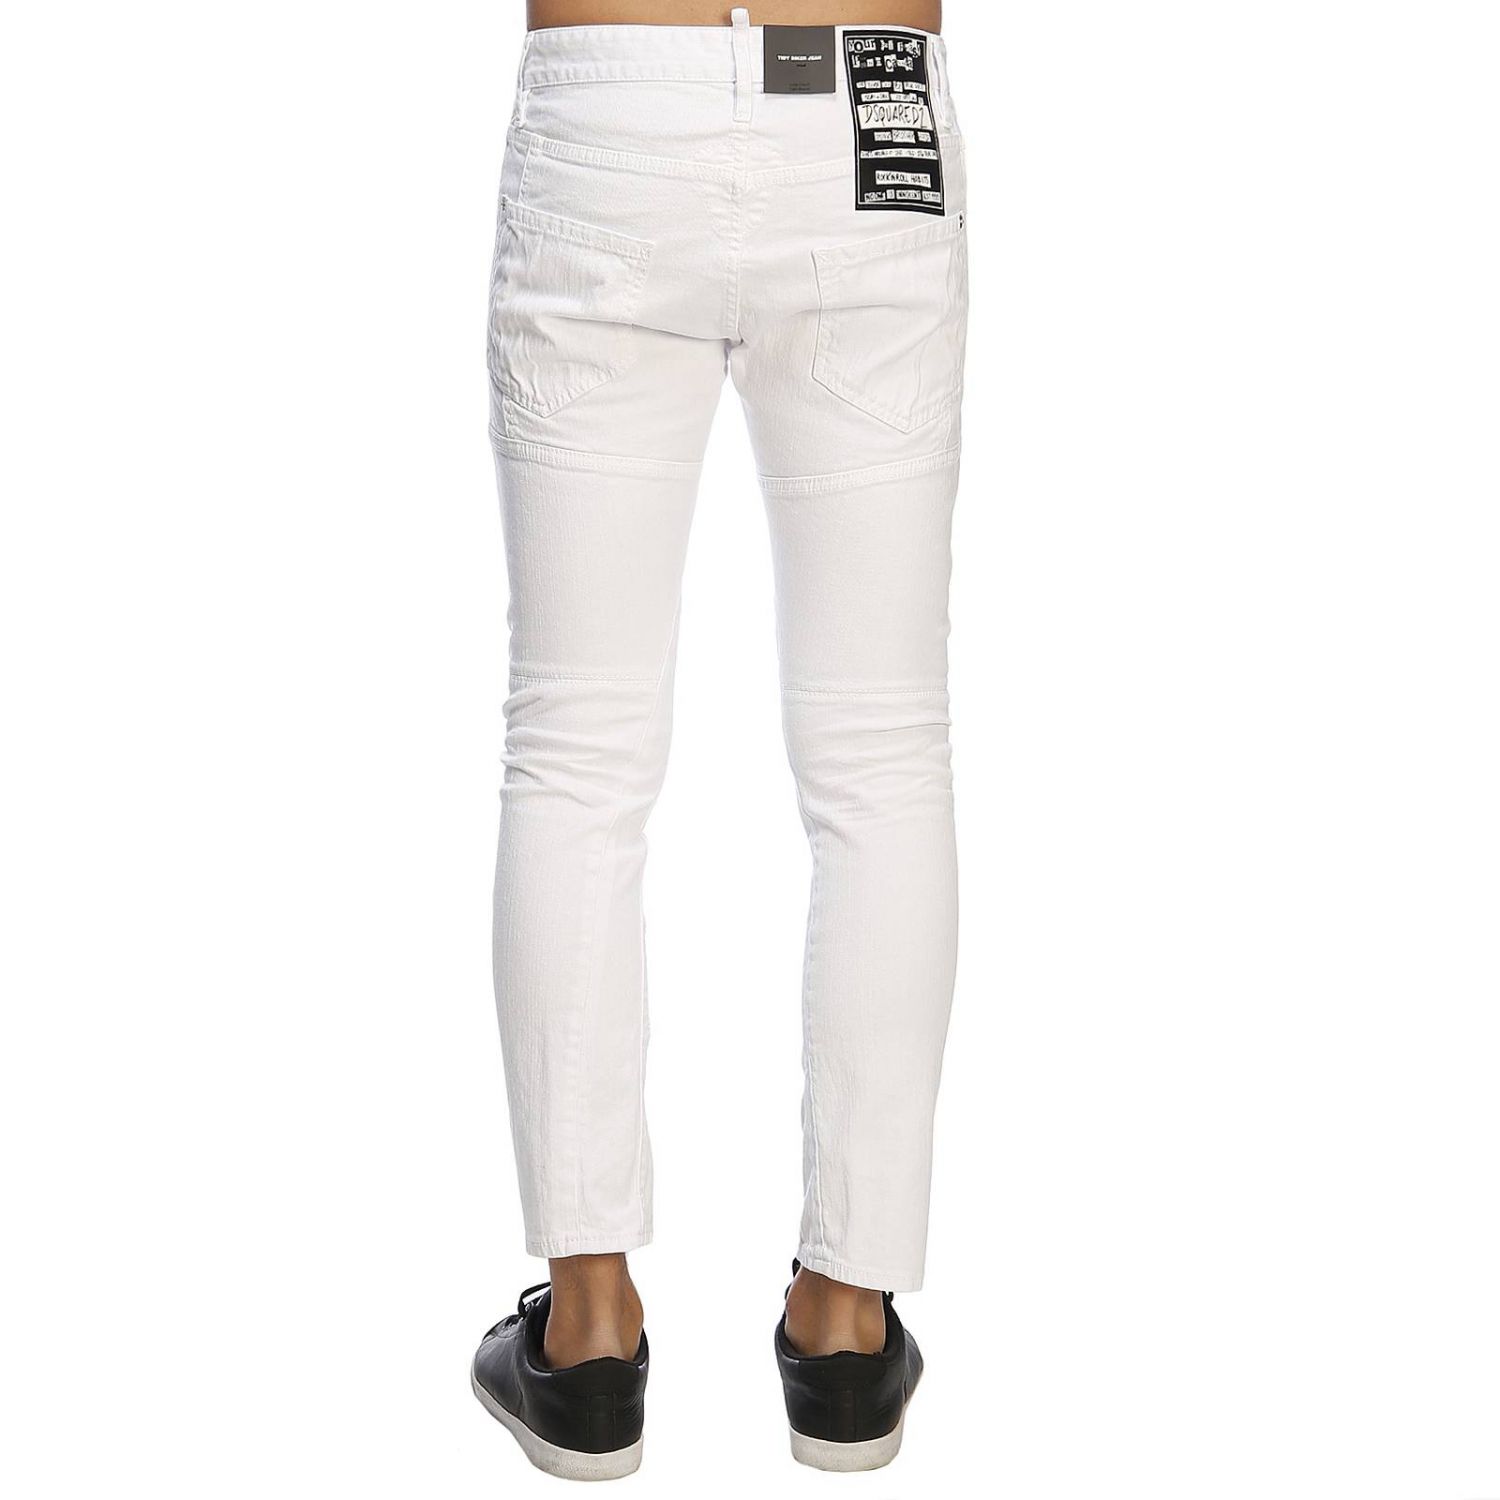 Dsquared2 Outlet: jeans for men - White | Dsquared2 jeans ...